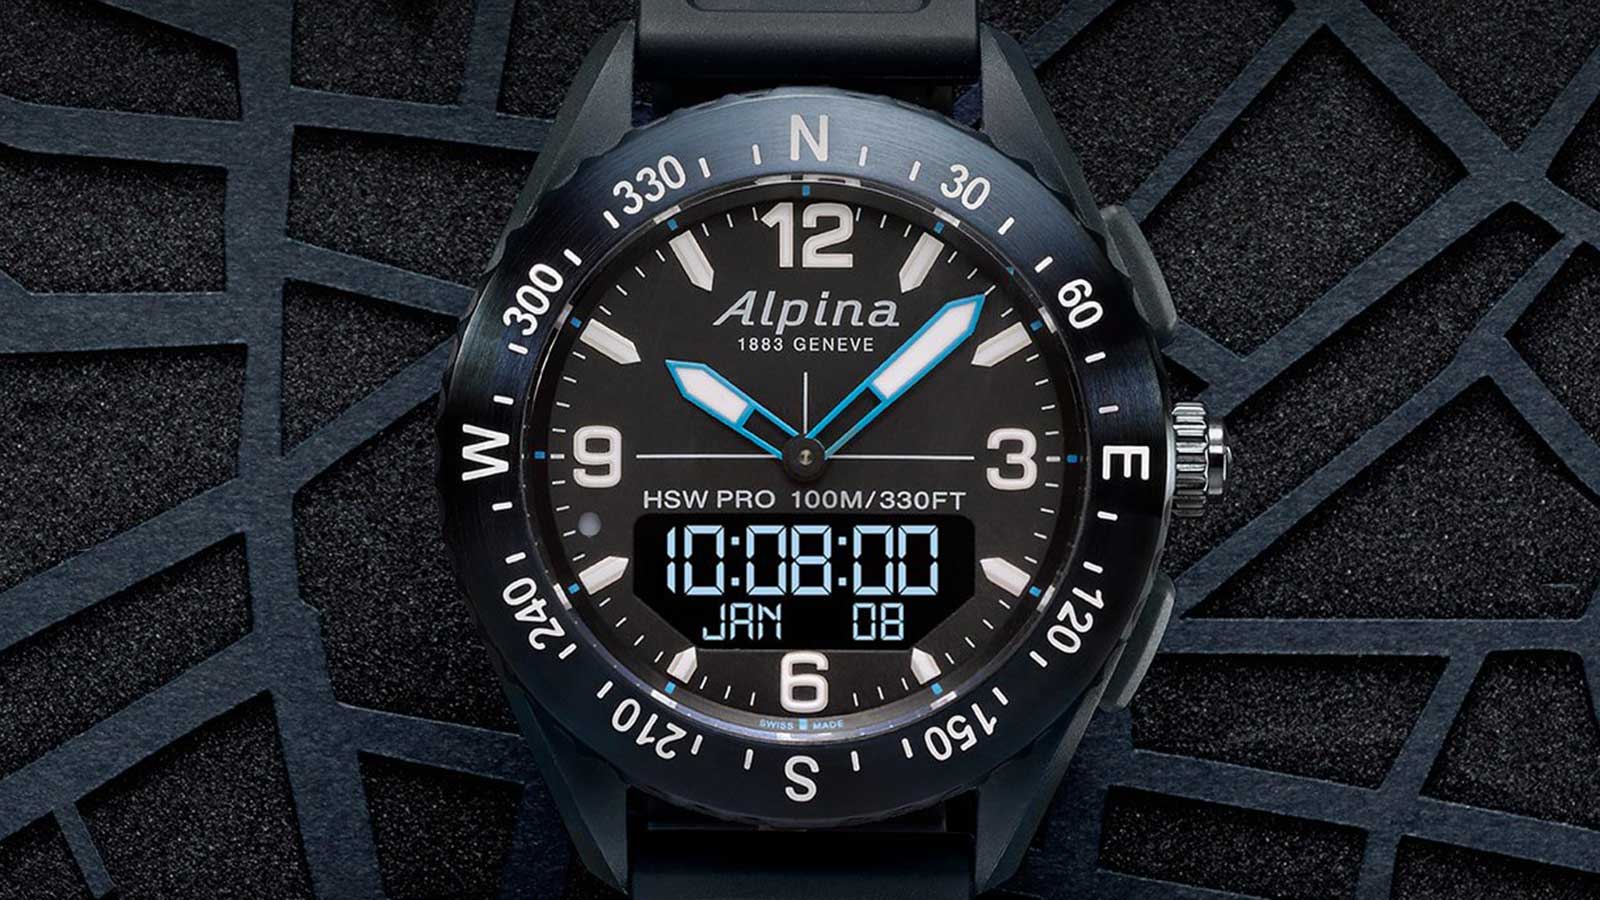 AlpinerX - Is This The Perfect Outdoorsman Watch